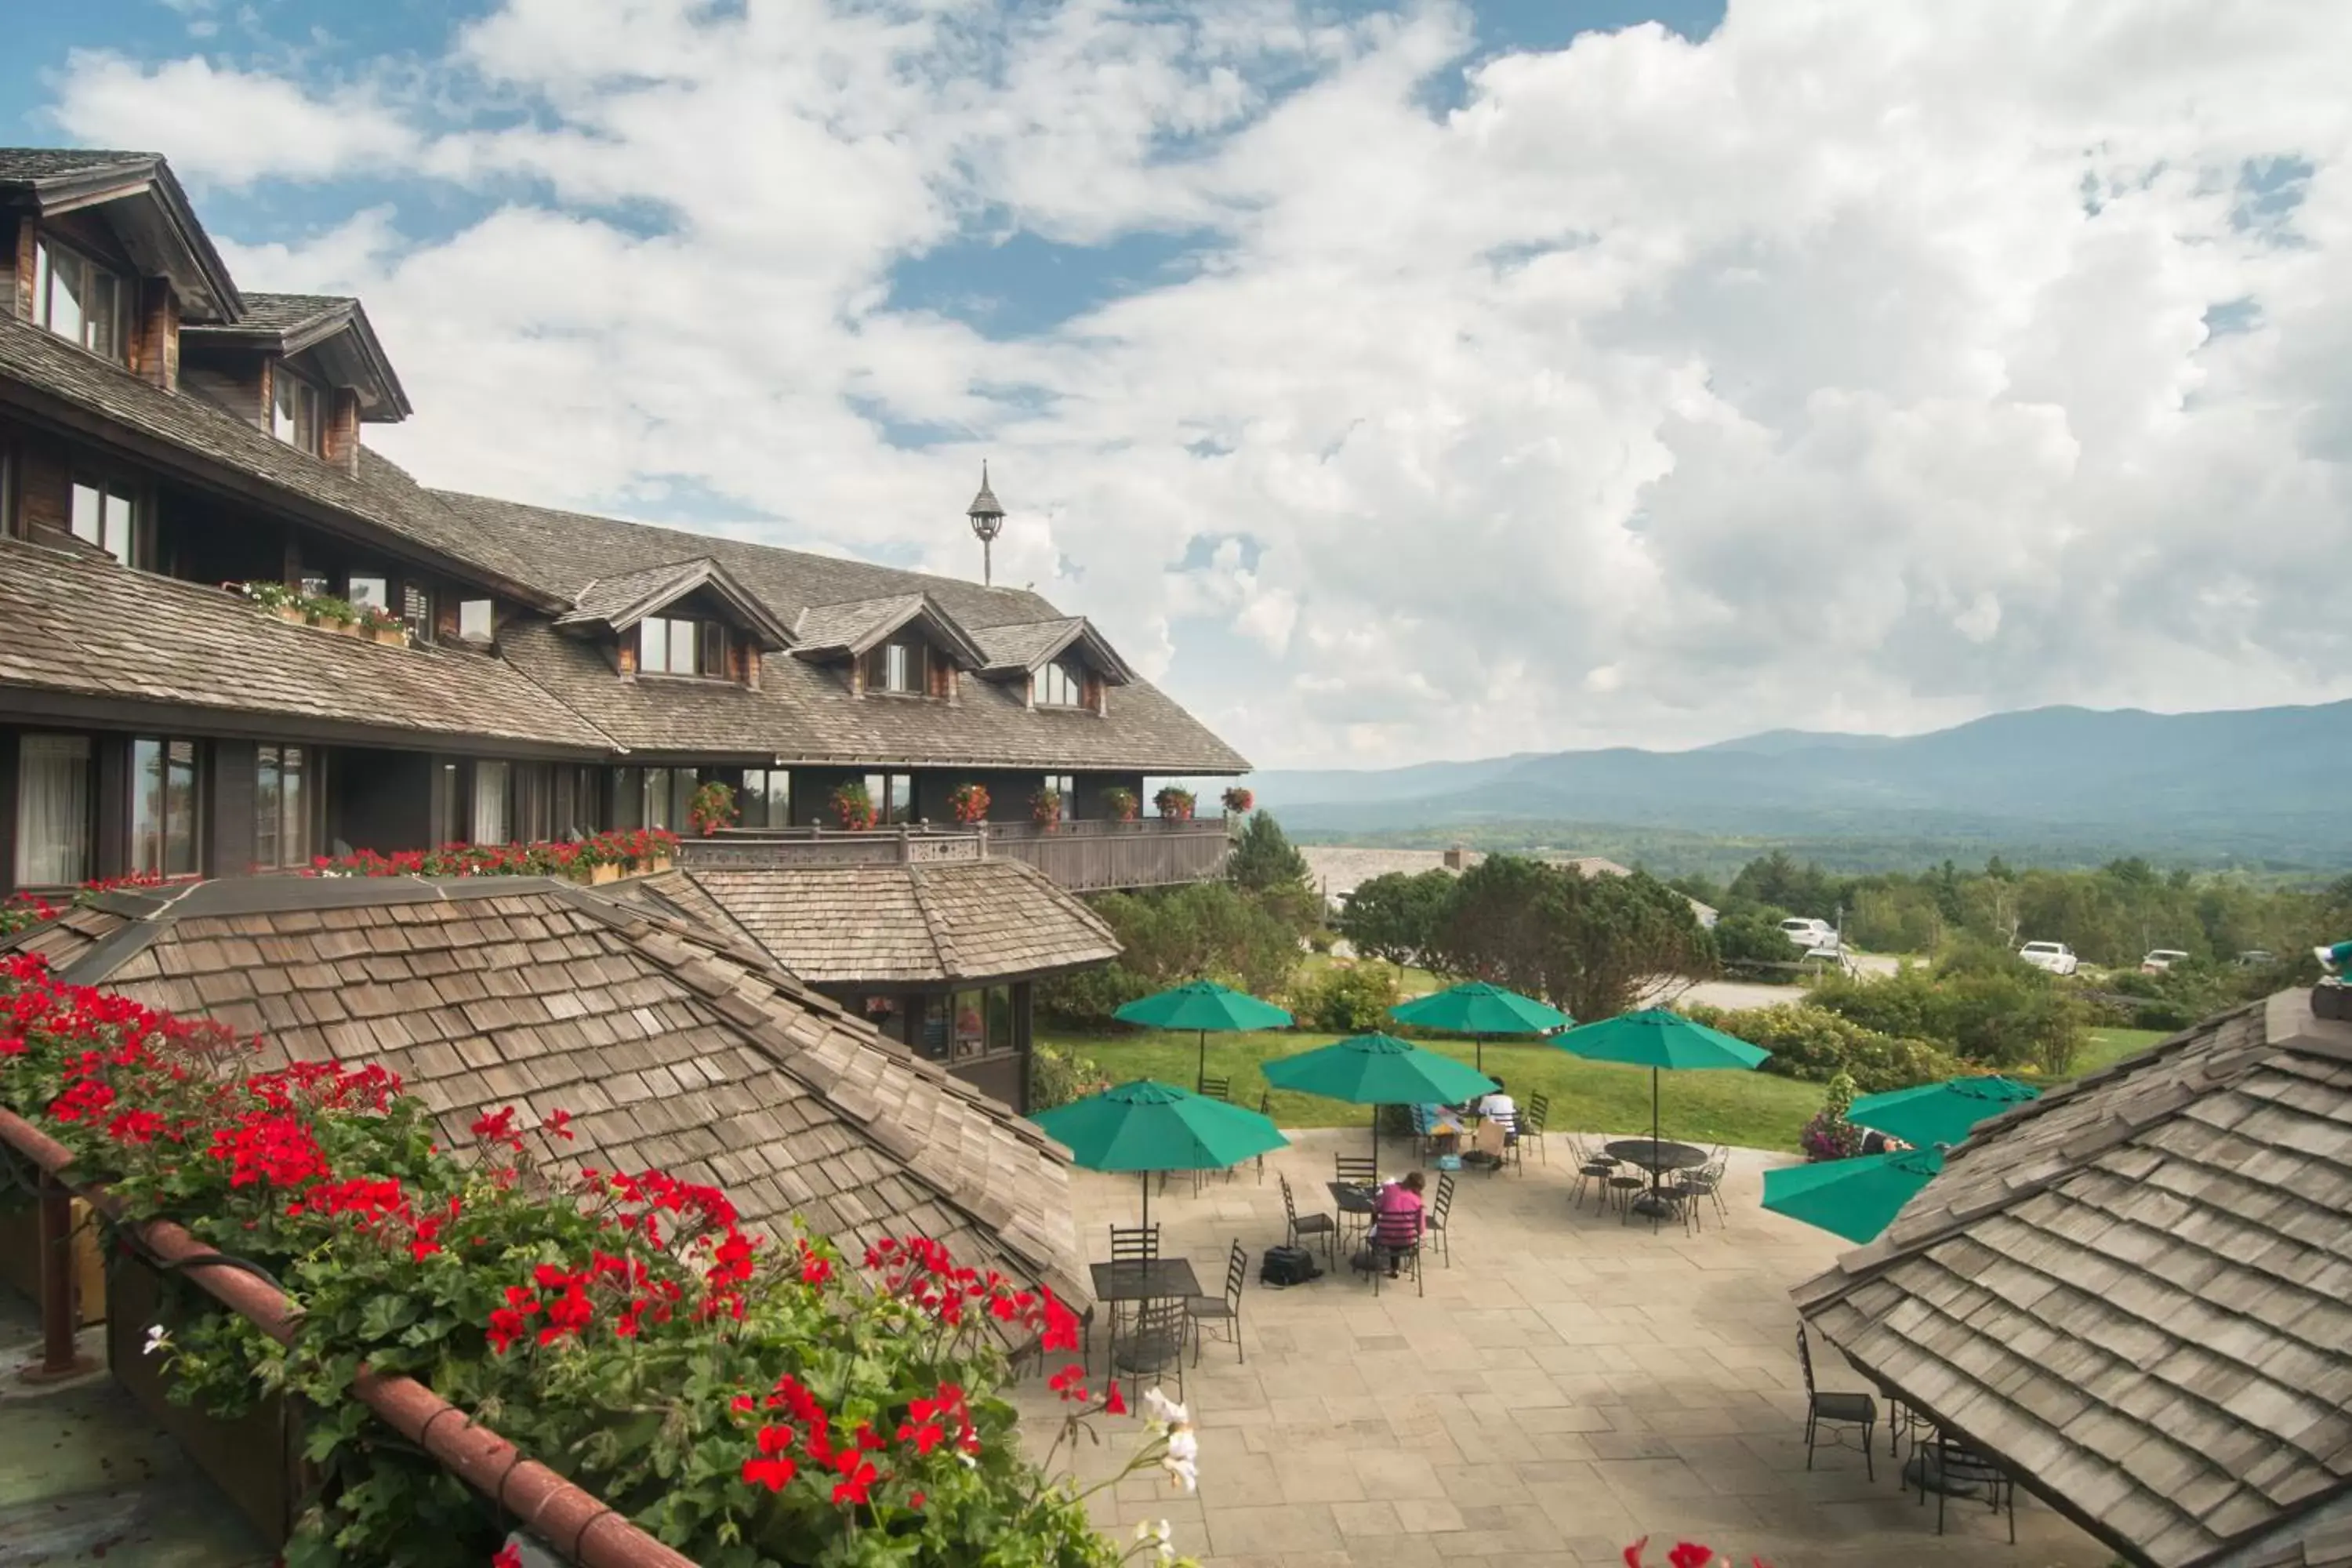 Bird's eye view, Pool View in Trapp Family Lodge